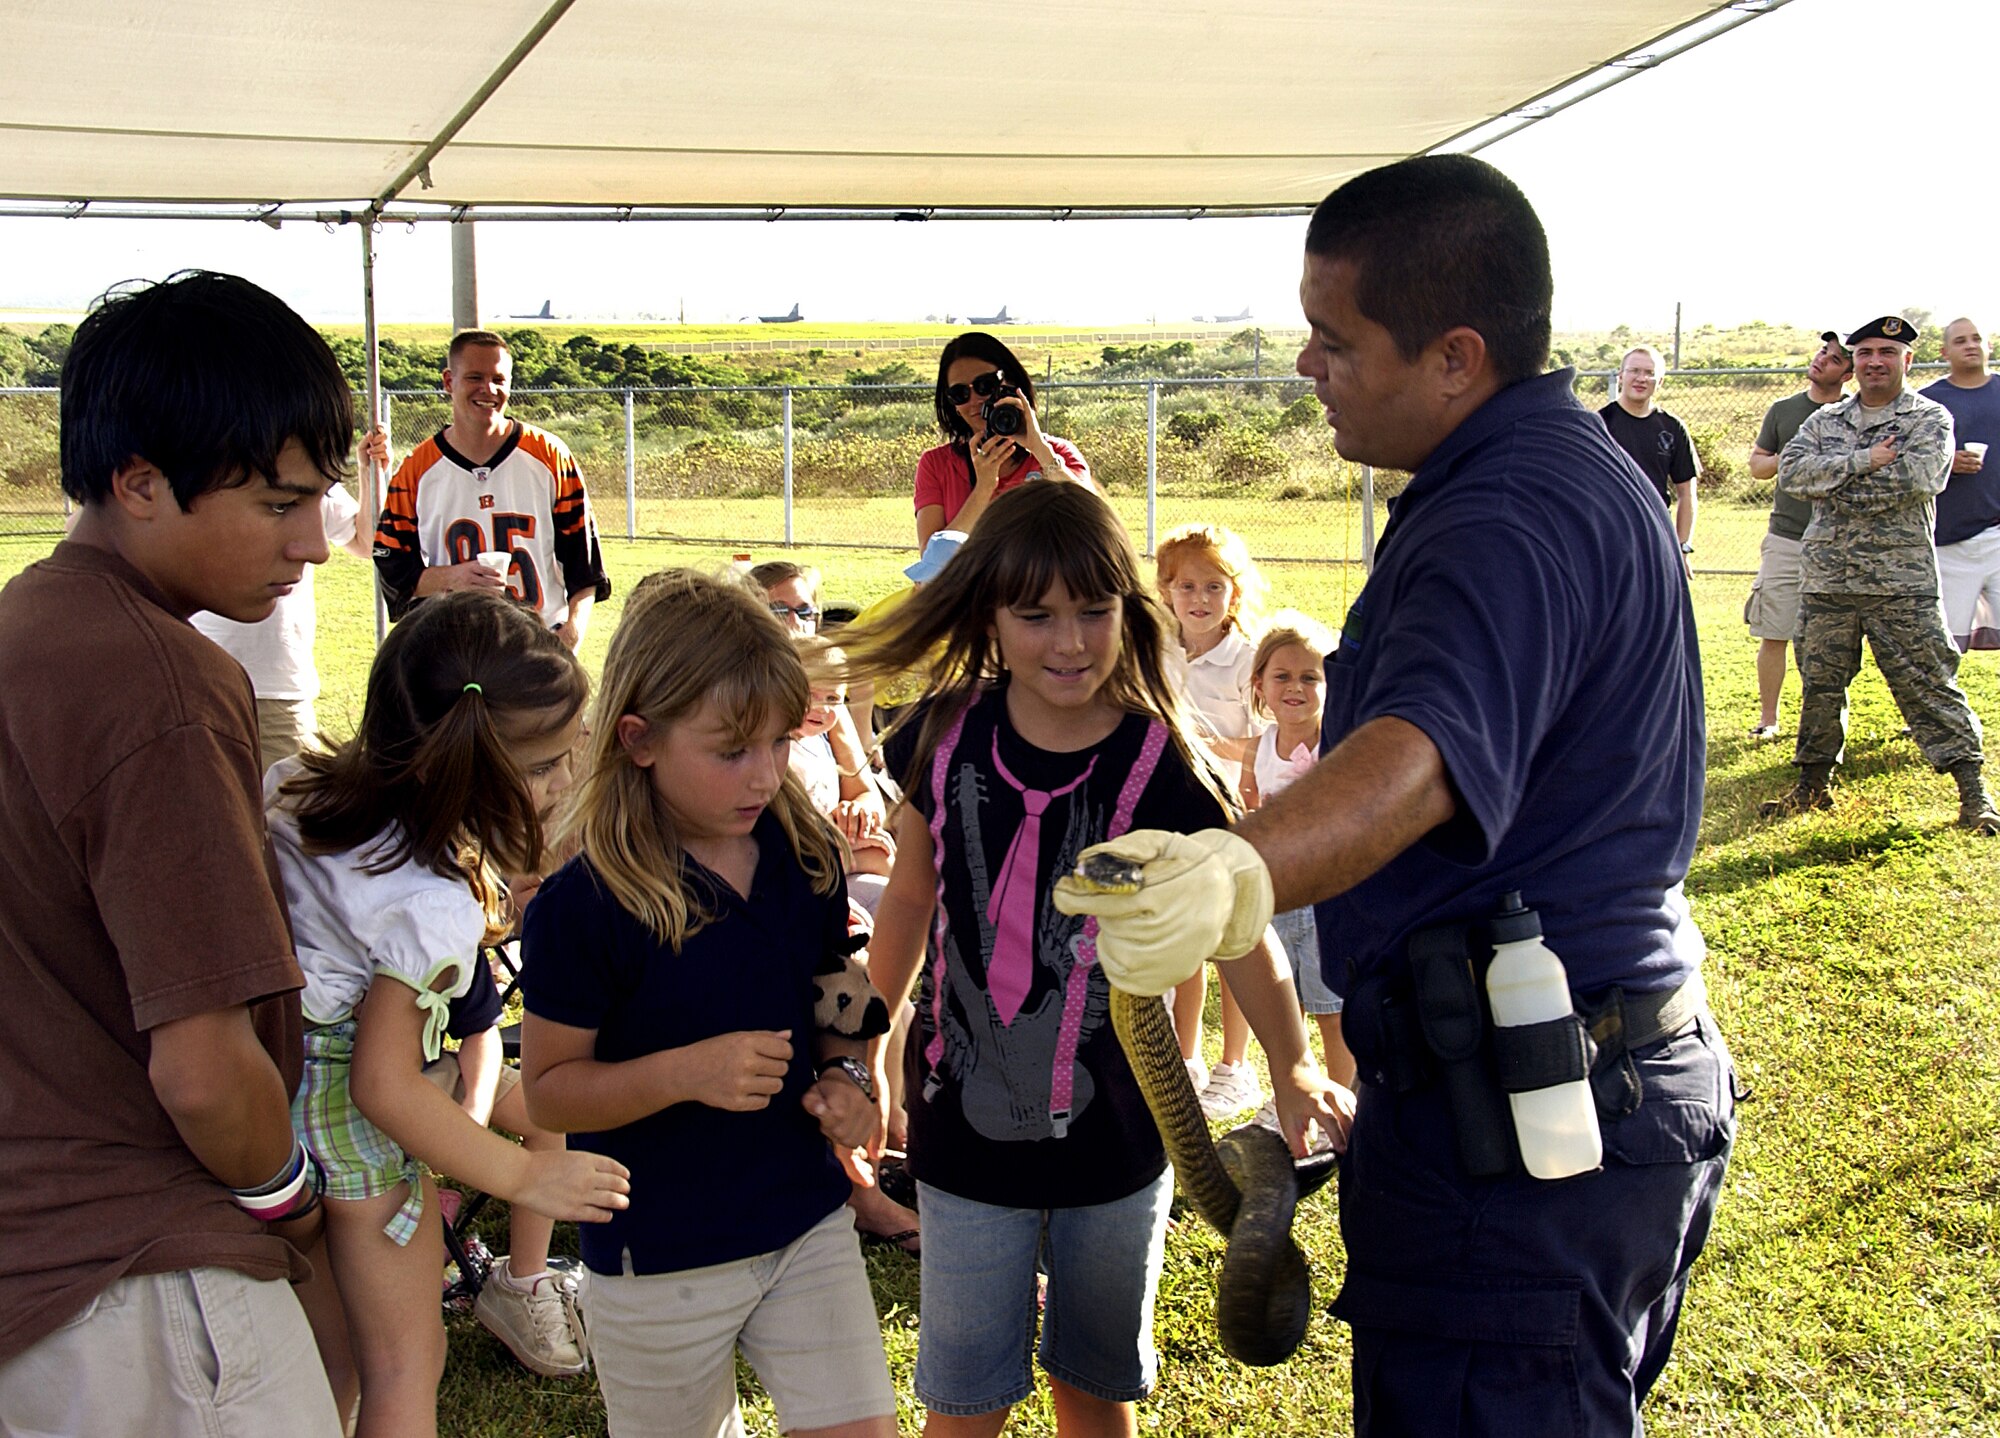 ANDERSEN AIR FORCE BASE, Guam -- Mr. Tony Pangelinan, the U.S. Department of Agriculture for Andersen area K9 trainer, holds a brown tree snake while members of the crowd come to touch and view the snake Feb. 2 at the first military working dog competition hosted by the 36th Security Forces Squadron here. Mr. Pangelinan and USDA working dog Shaun were one of the five teams to compete in this year's event. (U.S. Air Force photo by Airman 1st Class Carissa Wolff)                            